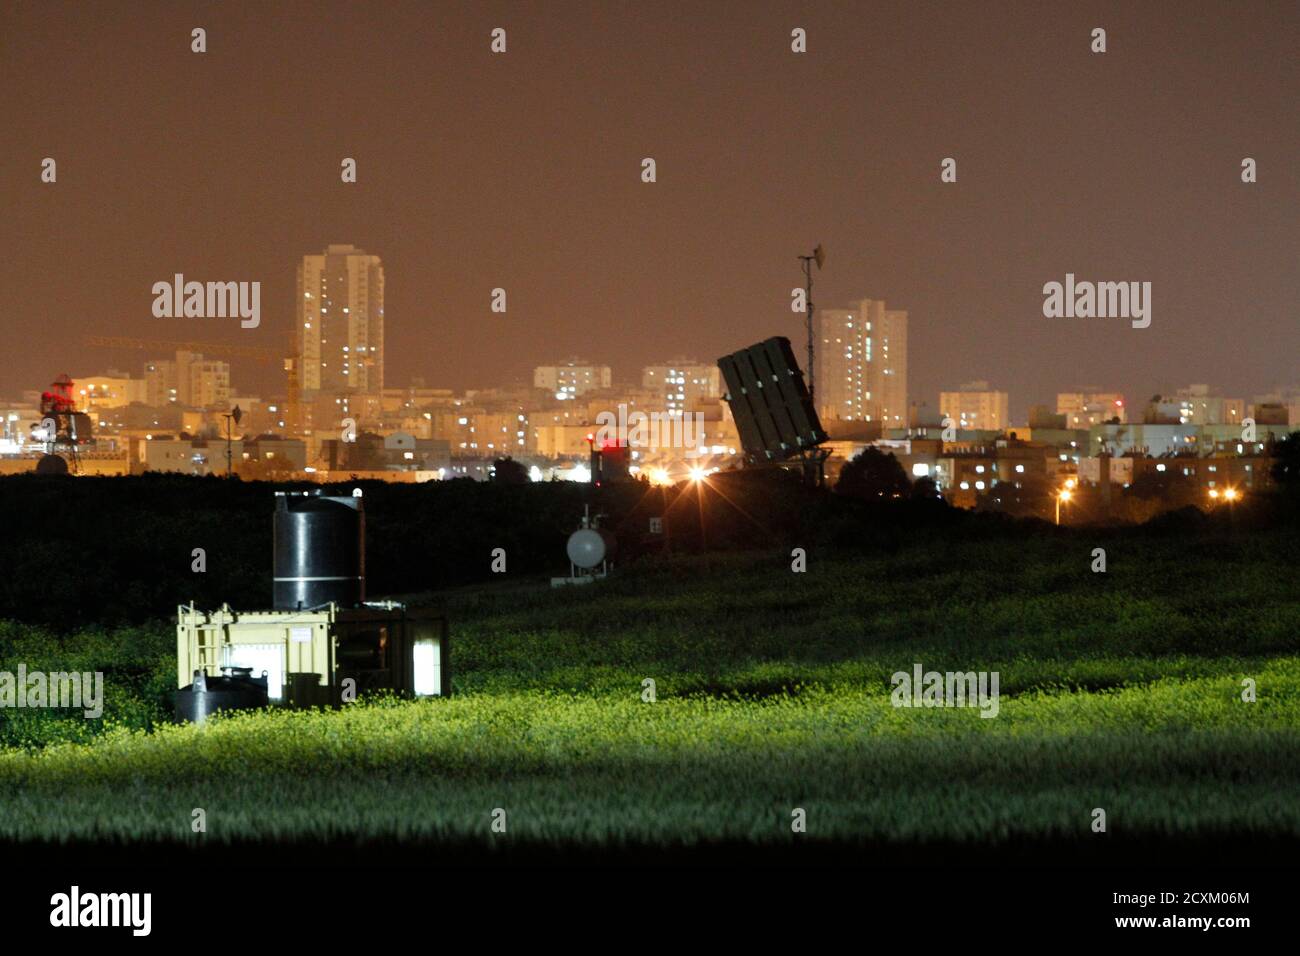 A launcher, part of the Iron Dome rocket shield system, is deployed in a field near the southern city of Ashdod March 10, 2012. Israeli warplanes killed five militants in Gaza on Saturday, the second day of cross-border violence in which Palestinian fighters have fired dozens of rockets into Israel, both sides said. REUTERS/Baz Ratner (ISRAEL - Tags: POLITICS CIVIL UNREST) Stock Photo